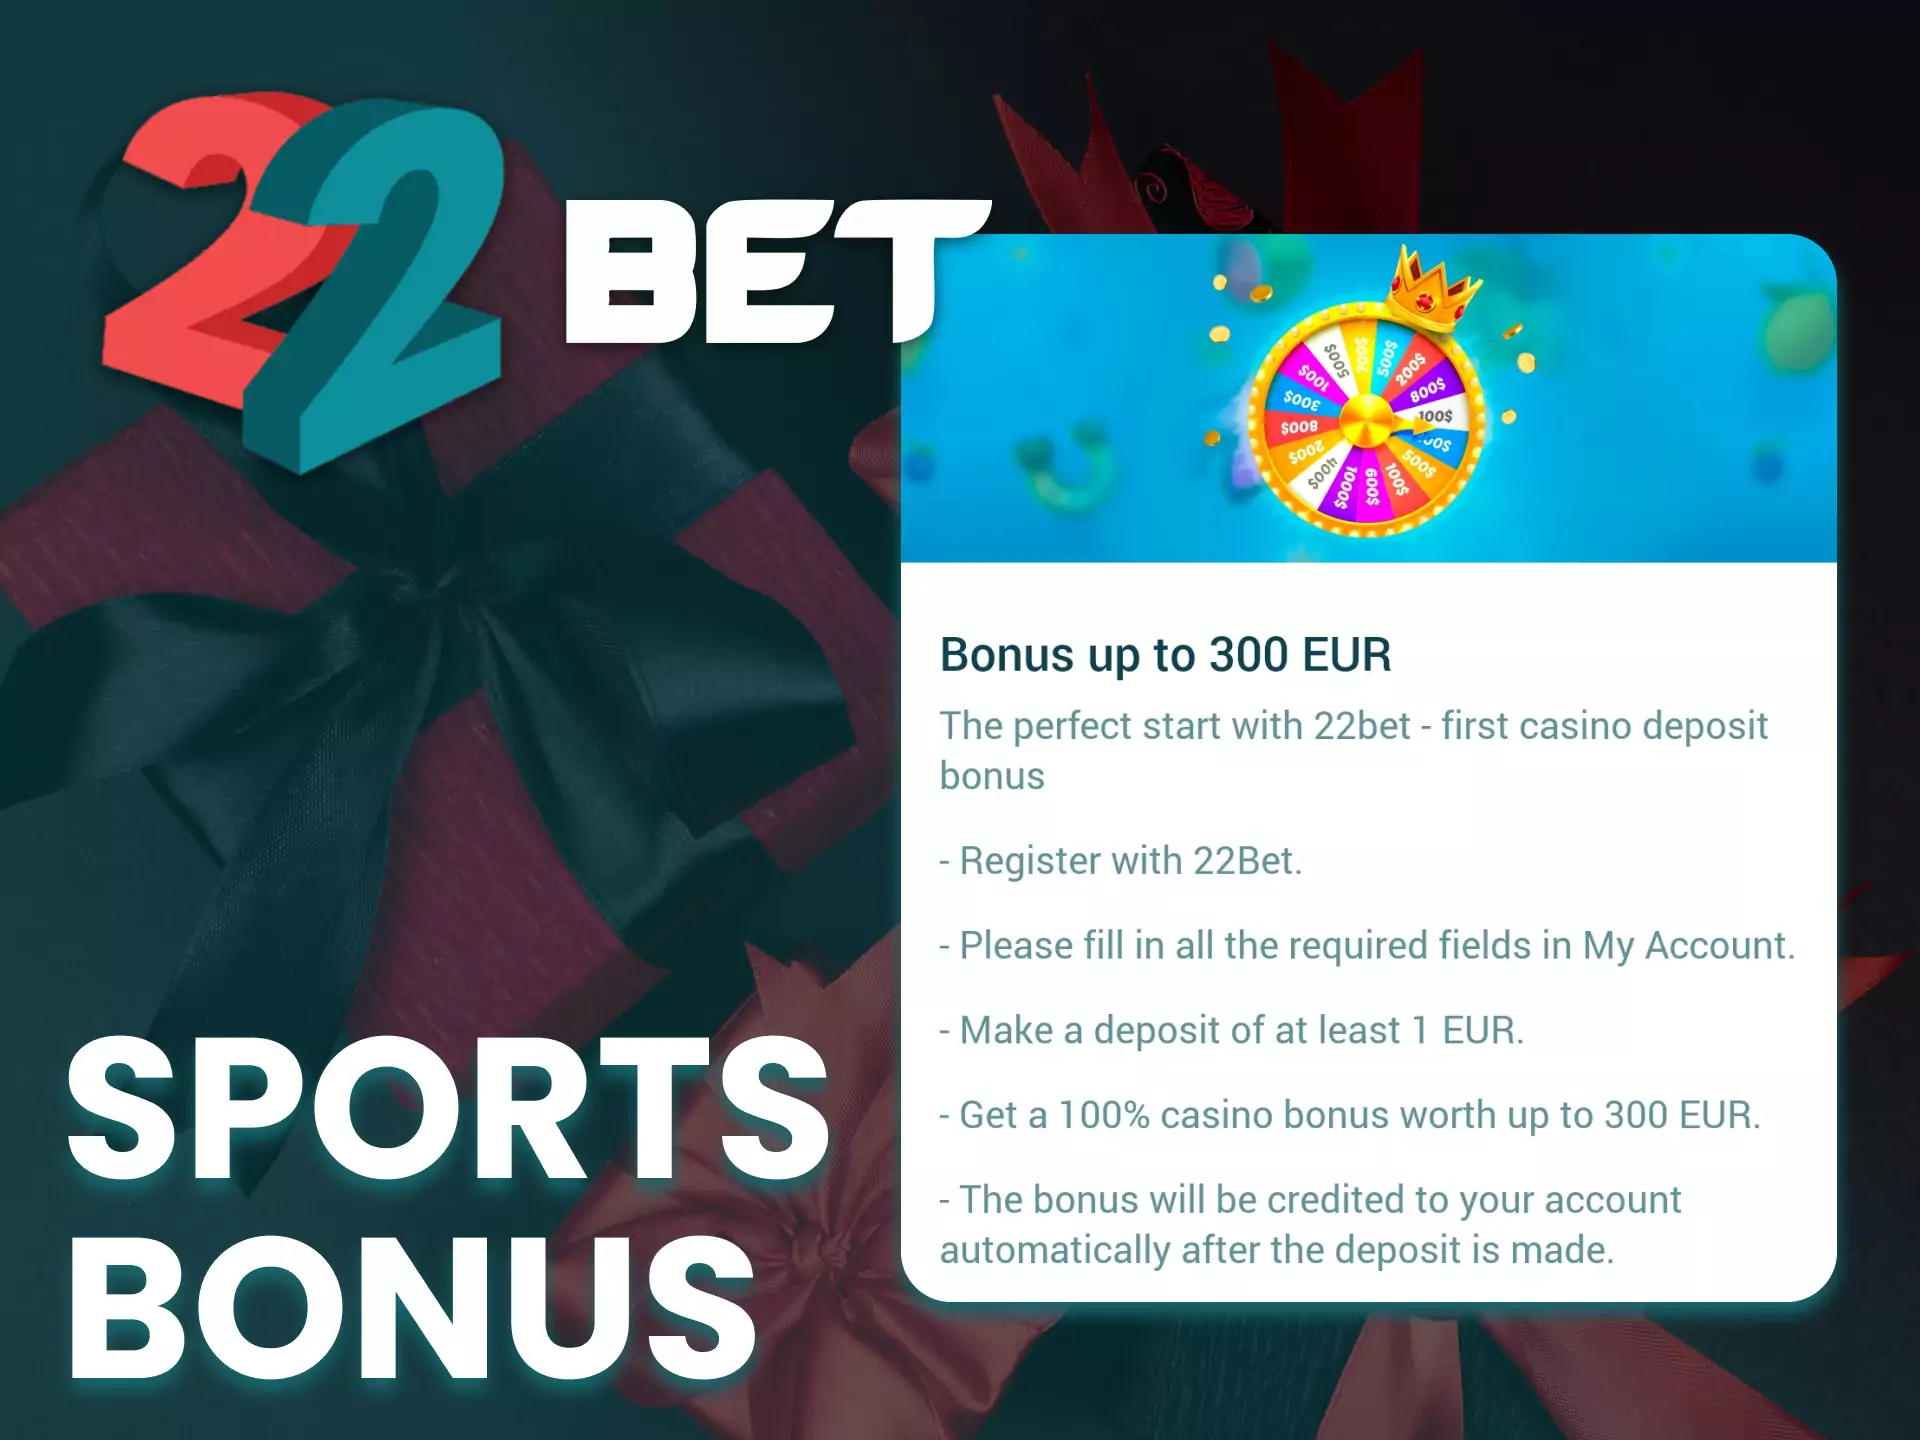 In the 22bet app you will get a special bonus for sports betting.